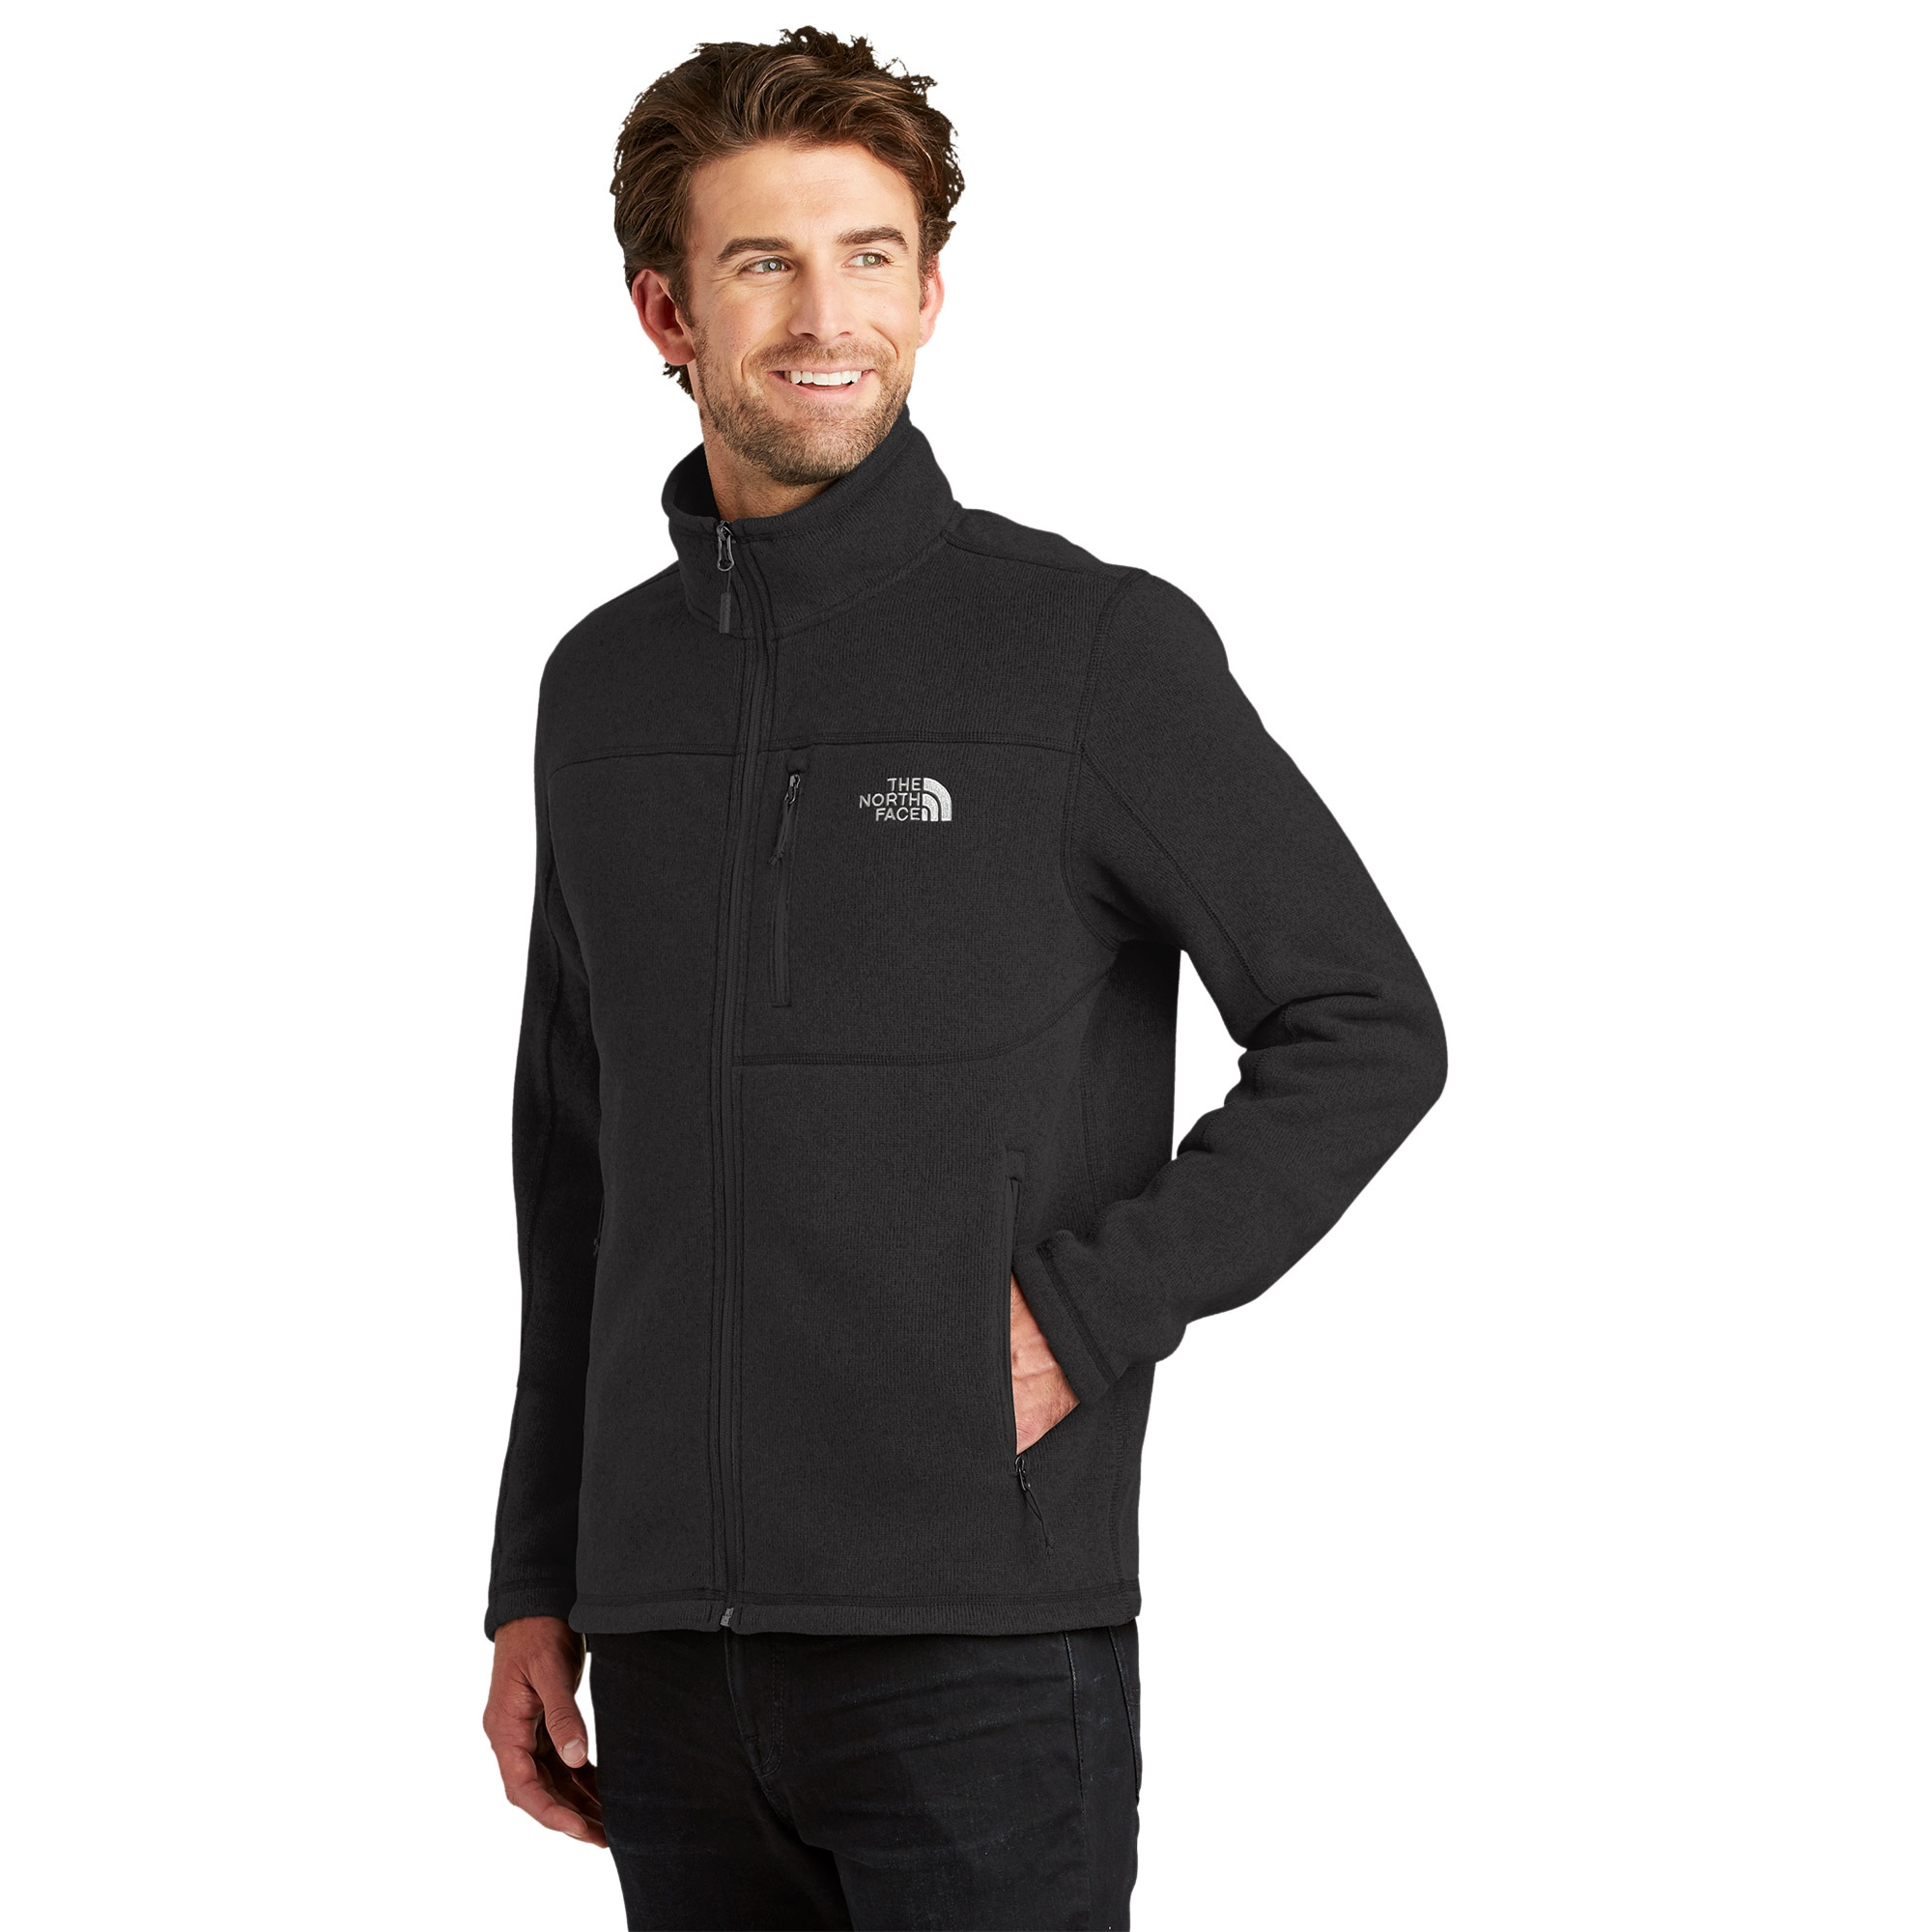 The North Face NF0A3LH7 Sweater Fleece Jacket - Black Heather | Full Source